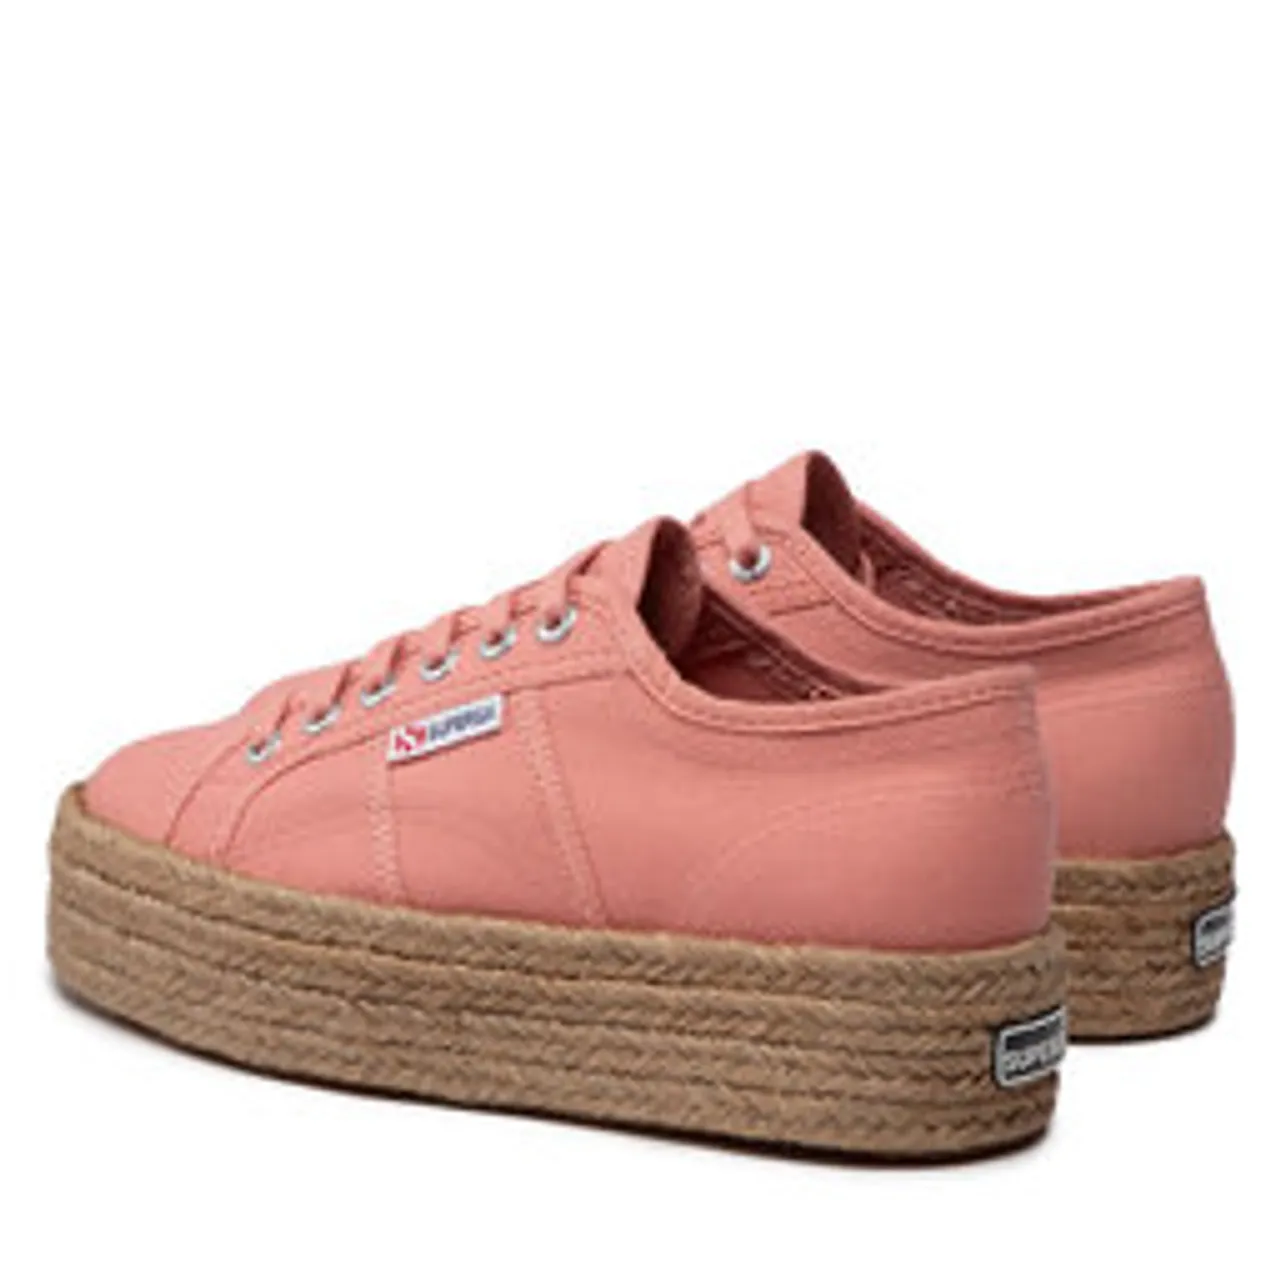 Espadrilles Superga 2790 Rope S51186W Pink Dusty Wde